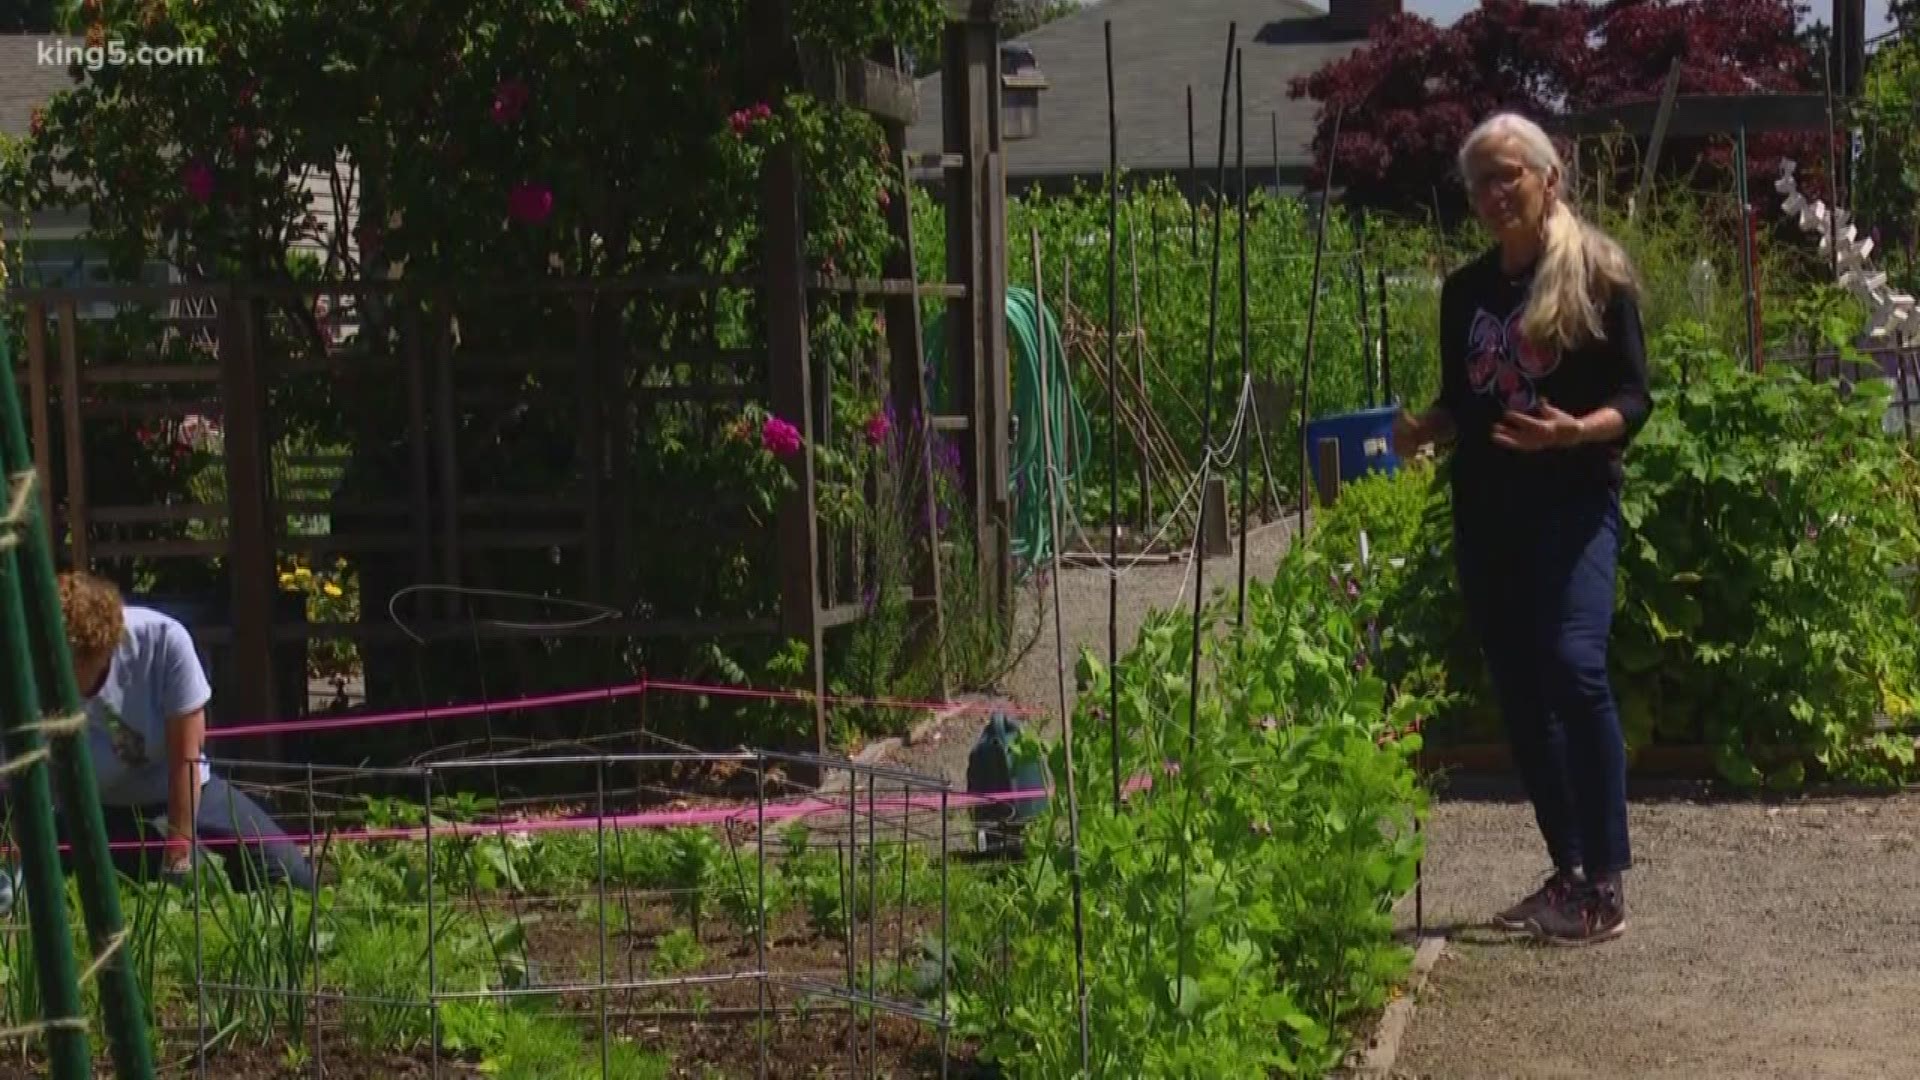 The land a community garden in Ballard occupies is being threatened by developers who want to build more town homes.